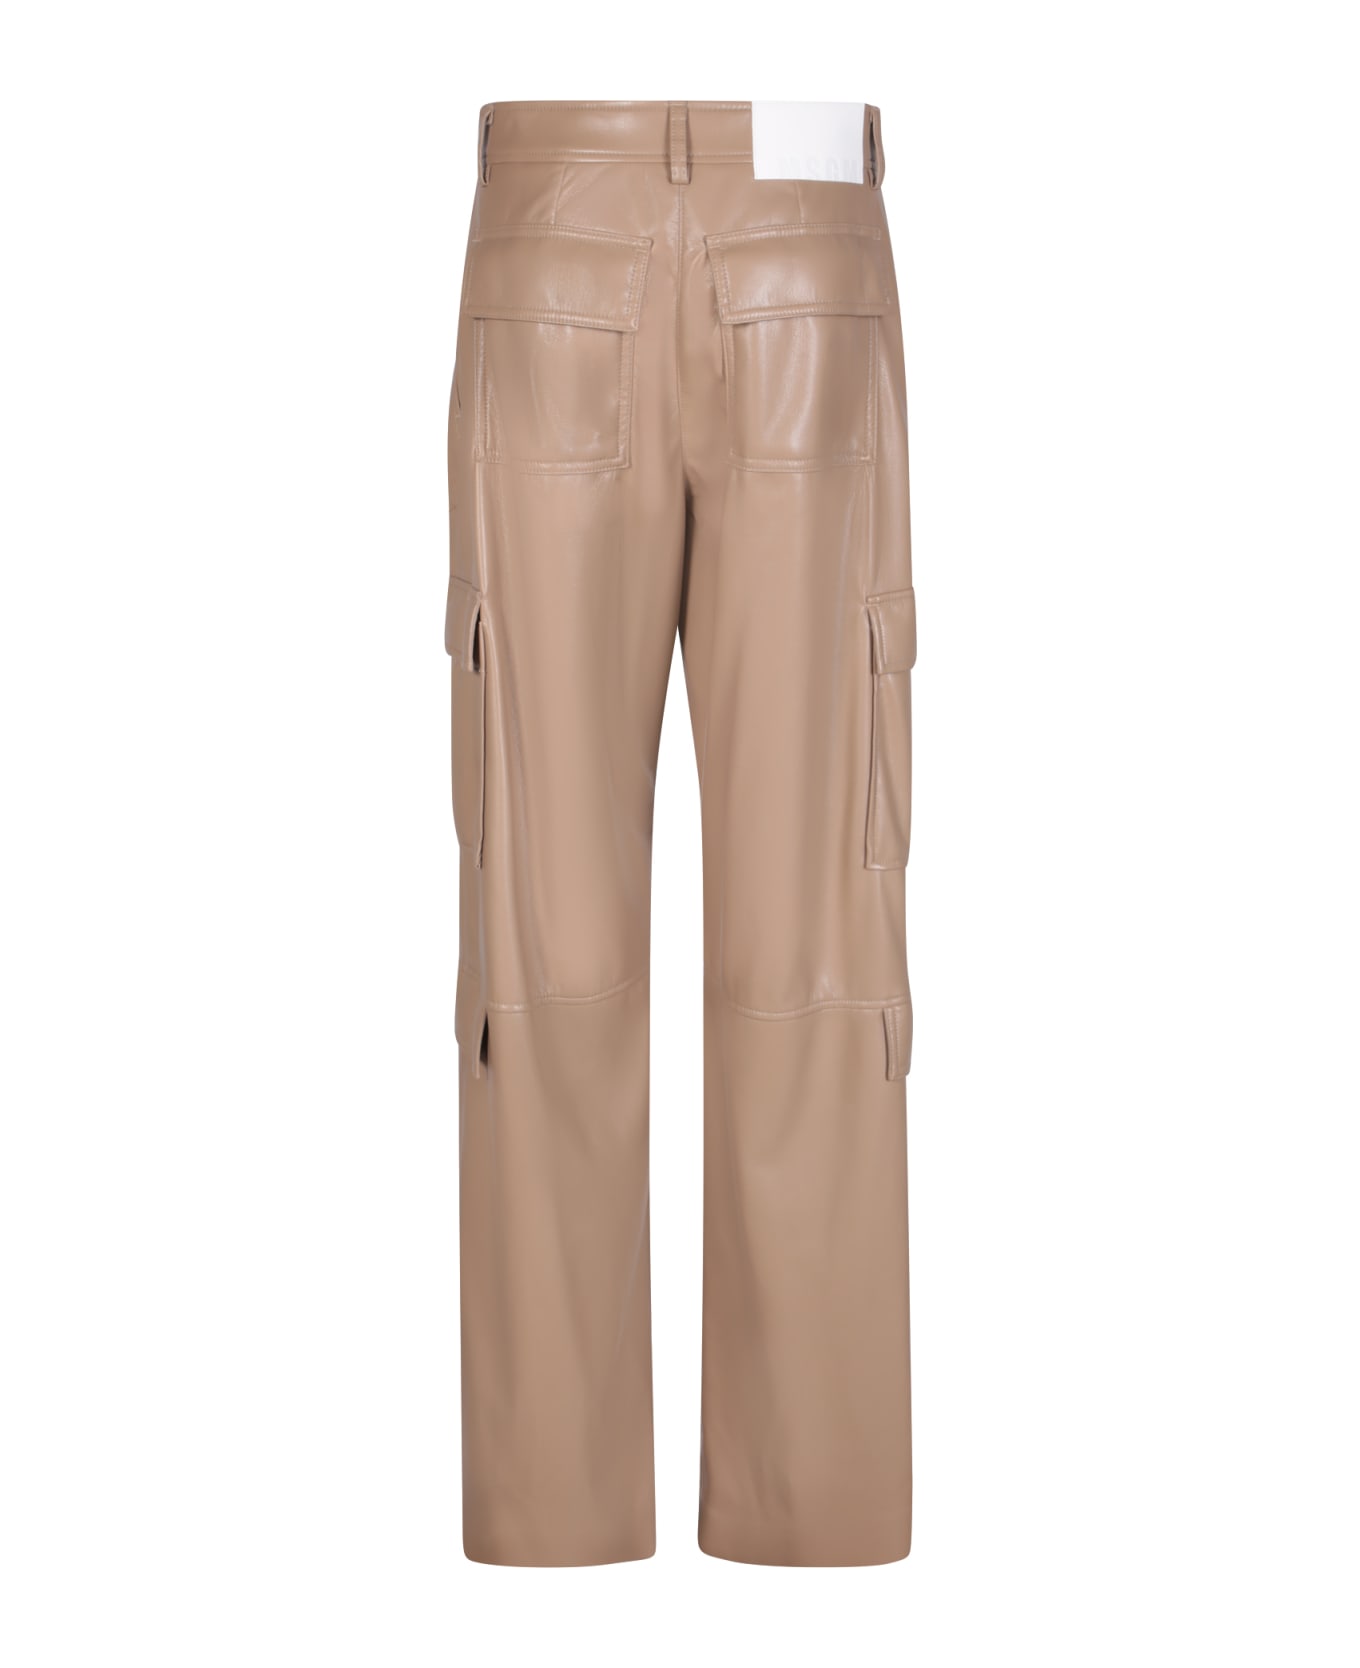 MSGM Soft Eco Leather Beige Cargo Trousers - Beige